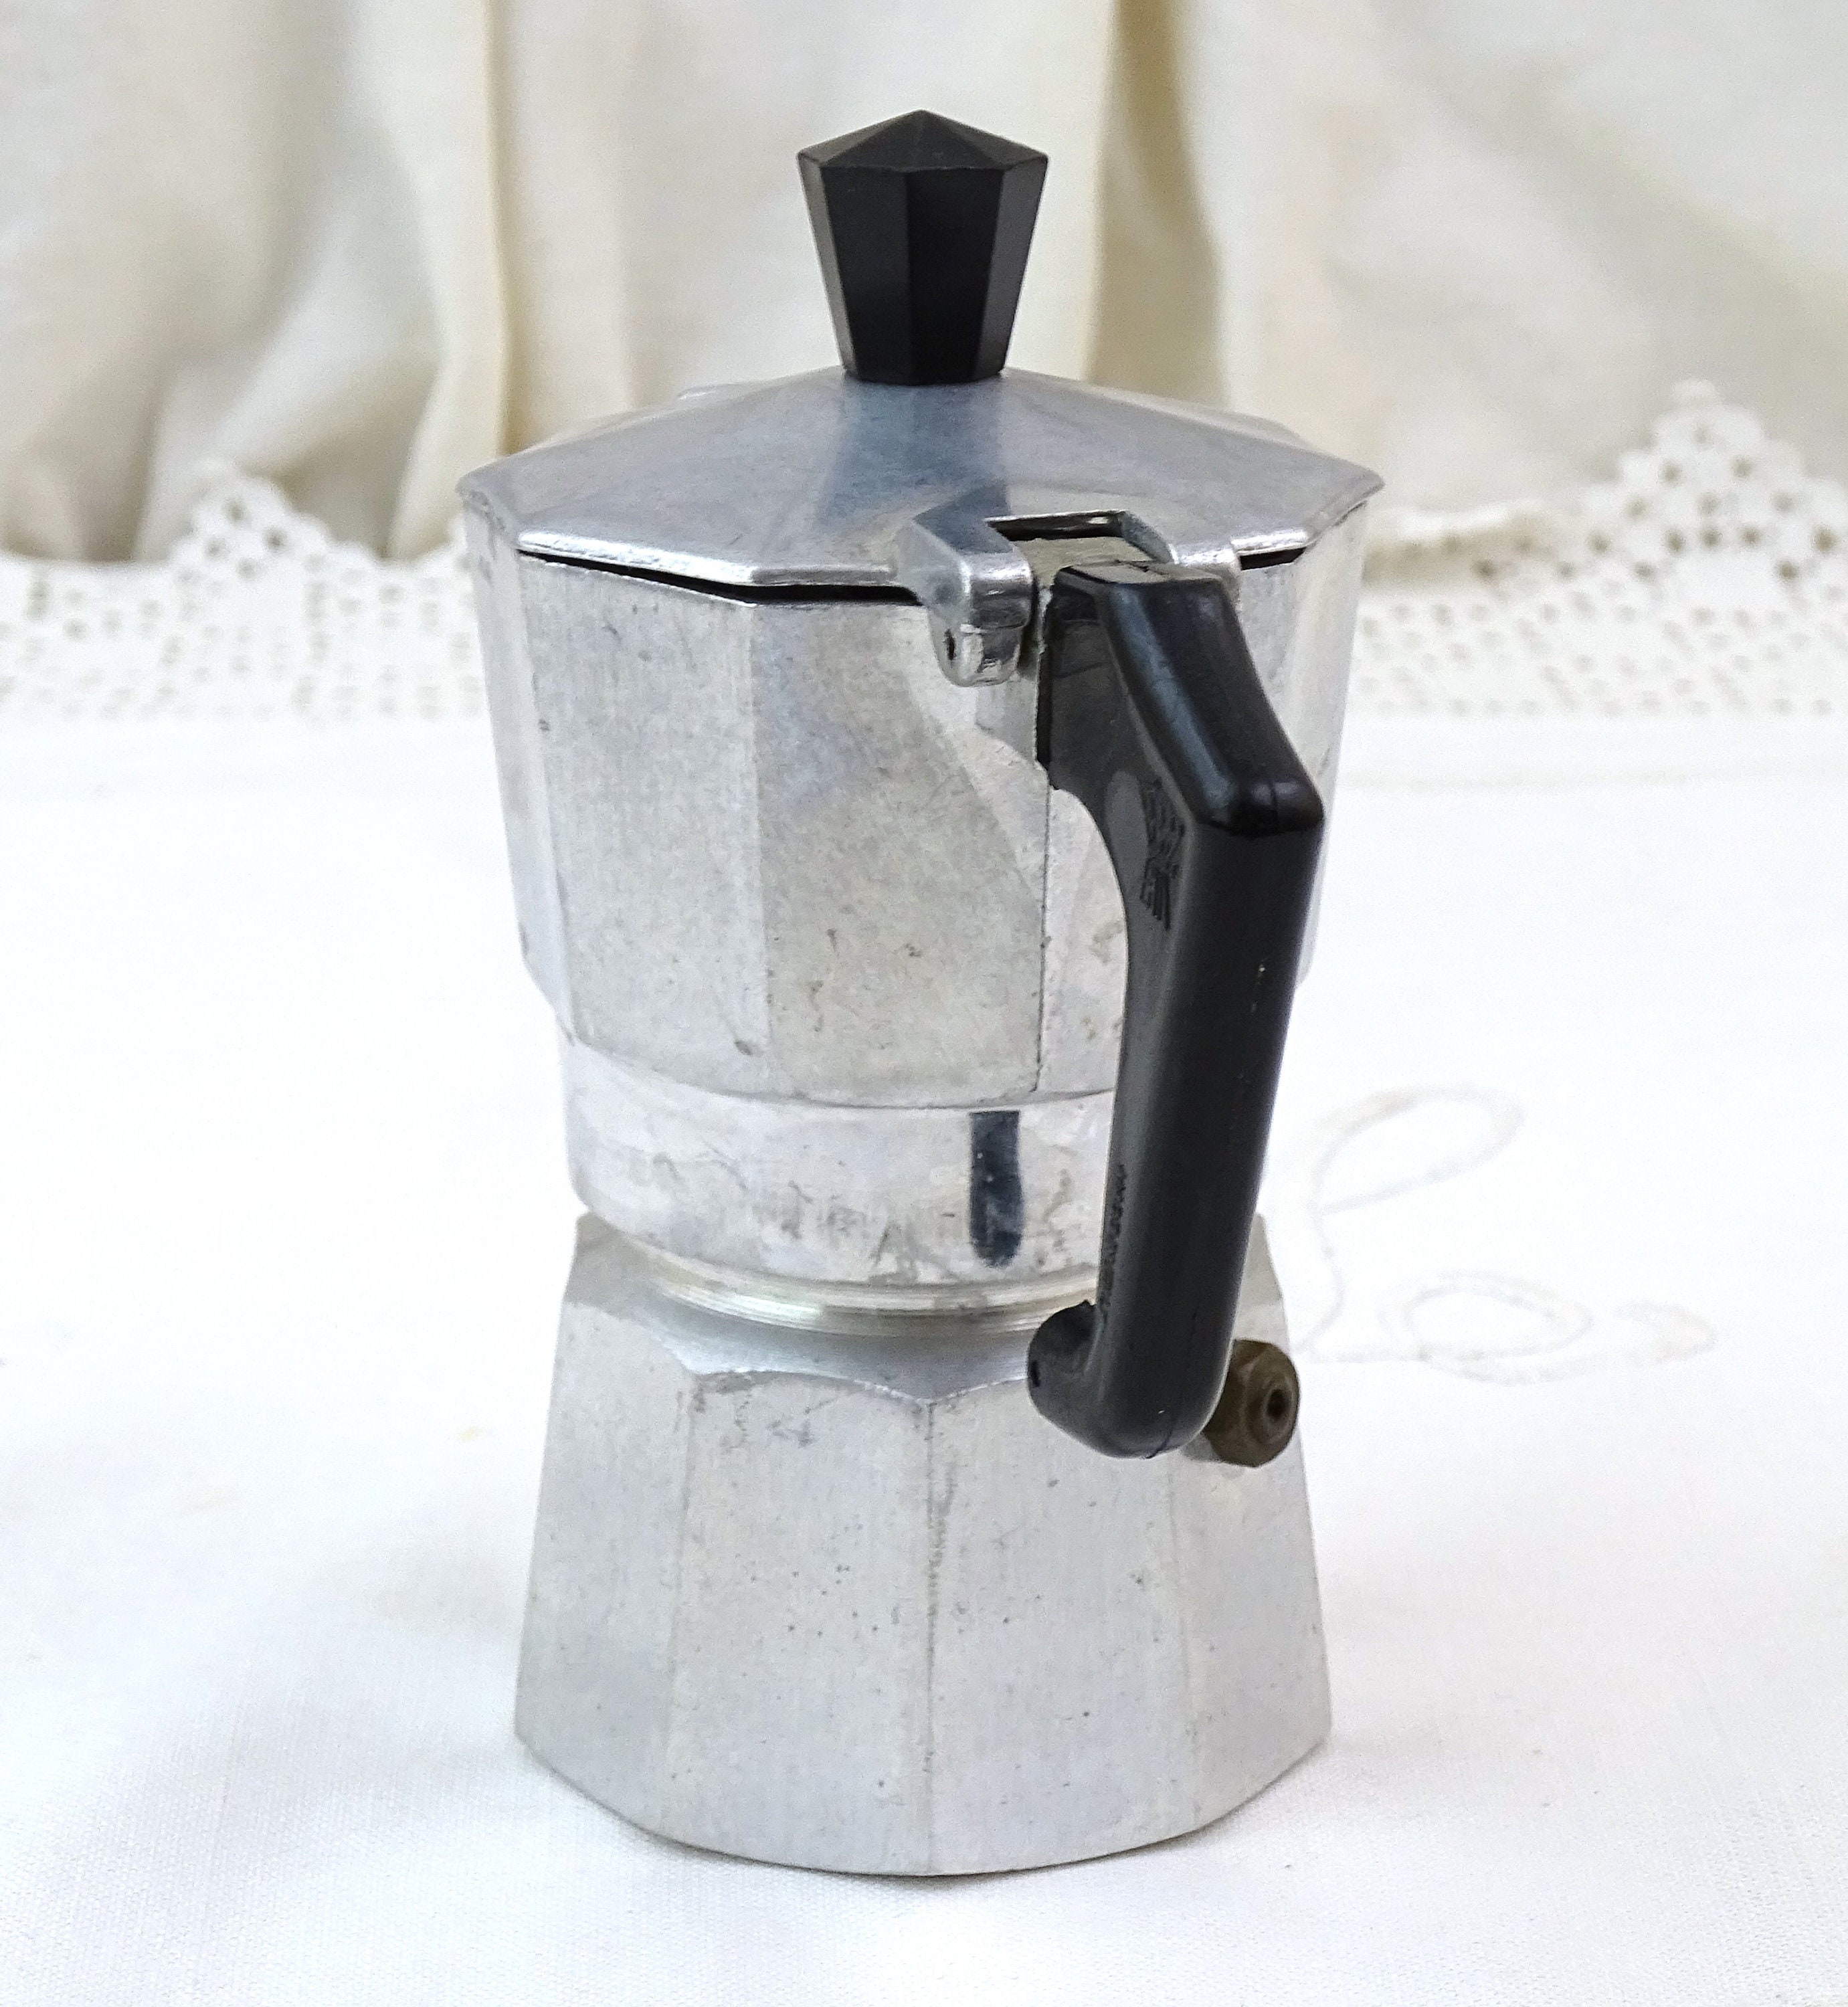 Laca Fetiere Vintage Large Stove Top Espresso Coffee Maker Made in Italy 